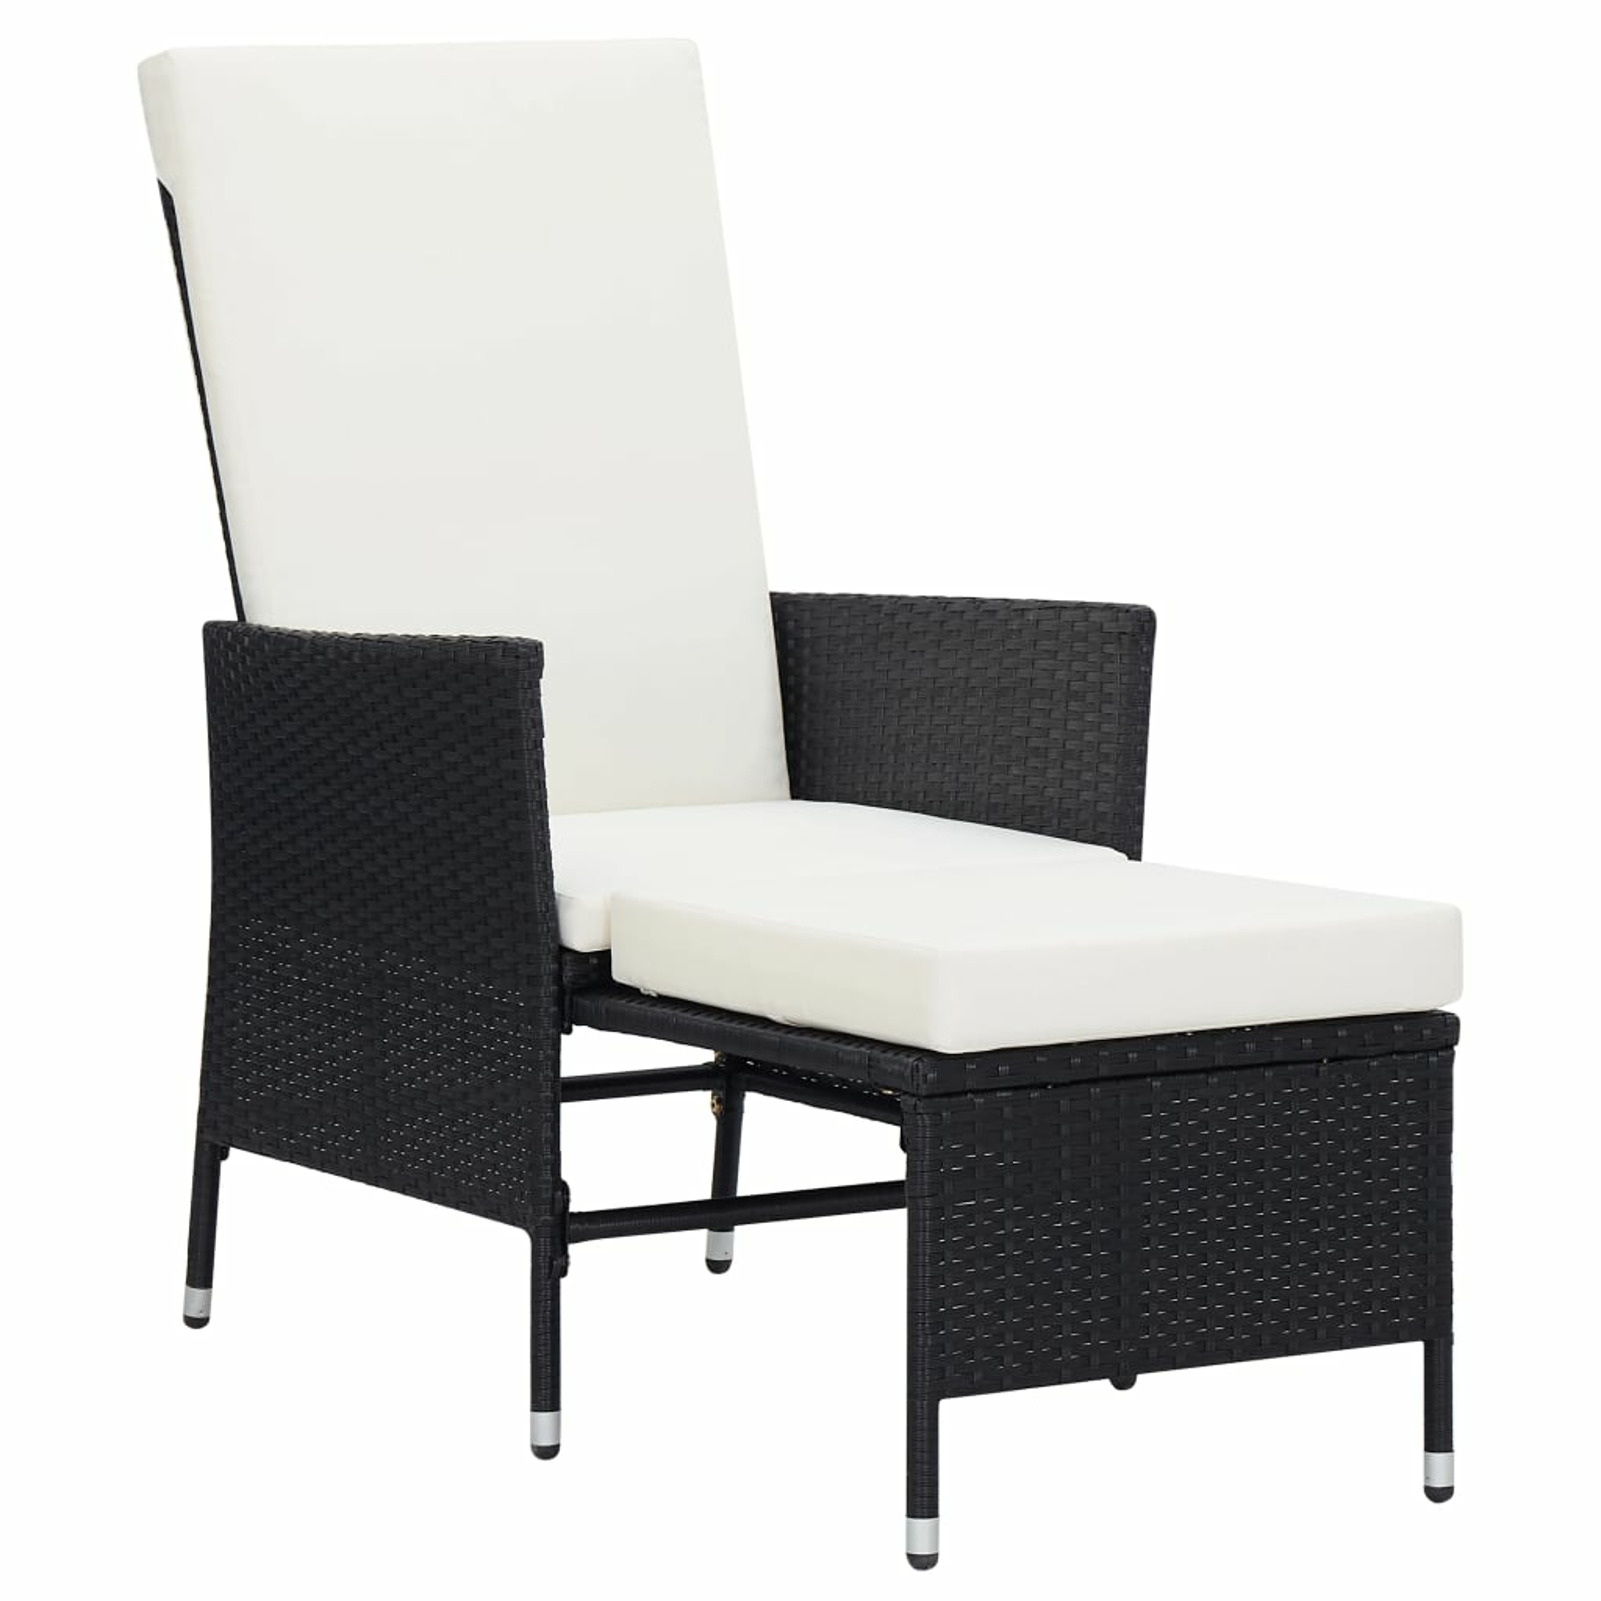 Dcenta Garden Reclining Chair Black Poly Rattan Armchair with Padded Cushions and Built-in Footrest Steel Frame for Patio, Poolside, Backyard, Balcony  Furniture - image 2 of 7